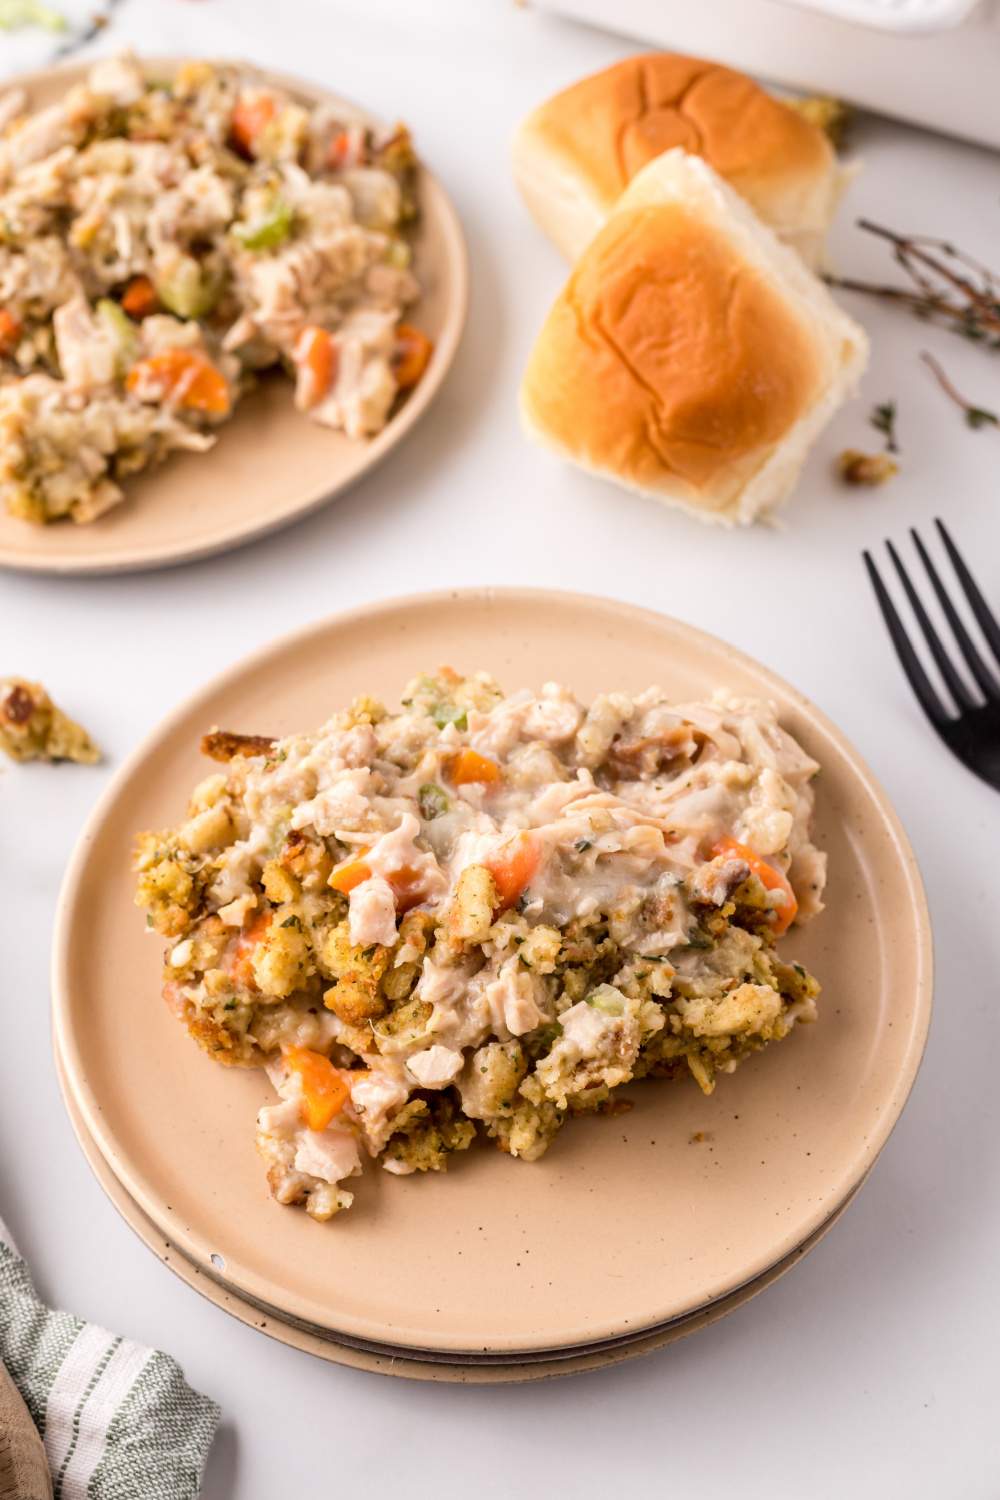 Country Turkey Casserole on a plate